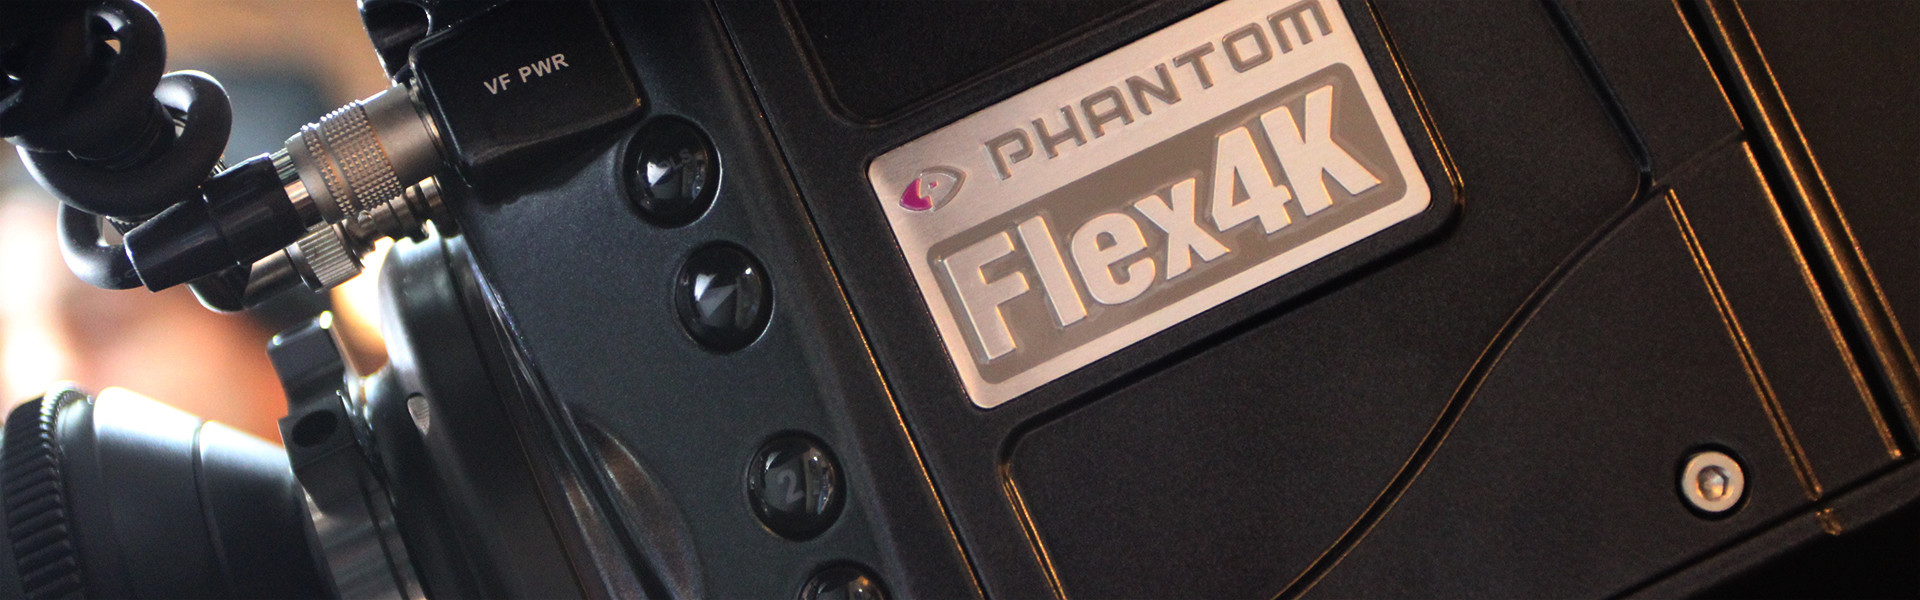 Header image for article Introducing the New Phantom Flex4K Digital Cinema Camera from Vision Research